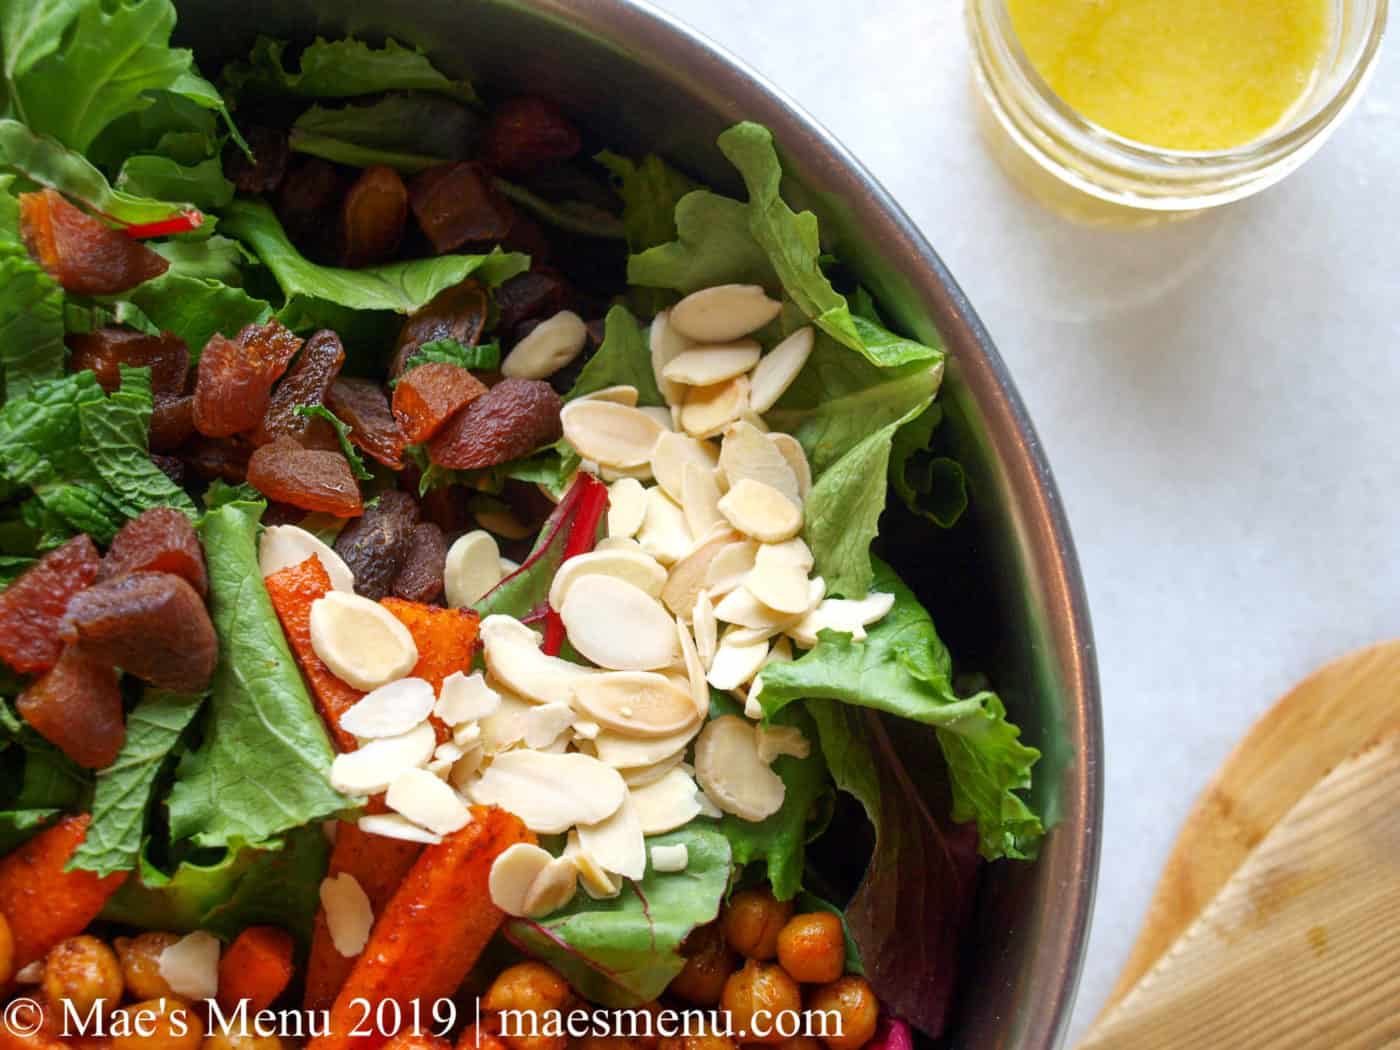 Metal bowl of green salad with chickpeas, carrots, almonds, and chopped dried apricots. Salad tongs and lemon dressing next to the bowl on the white counter.